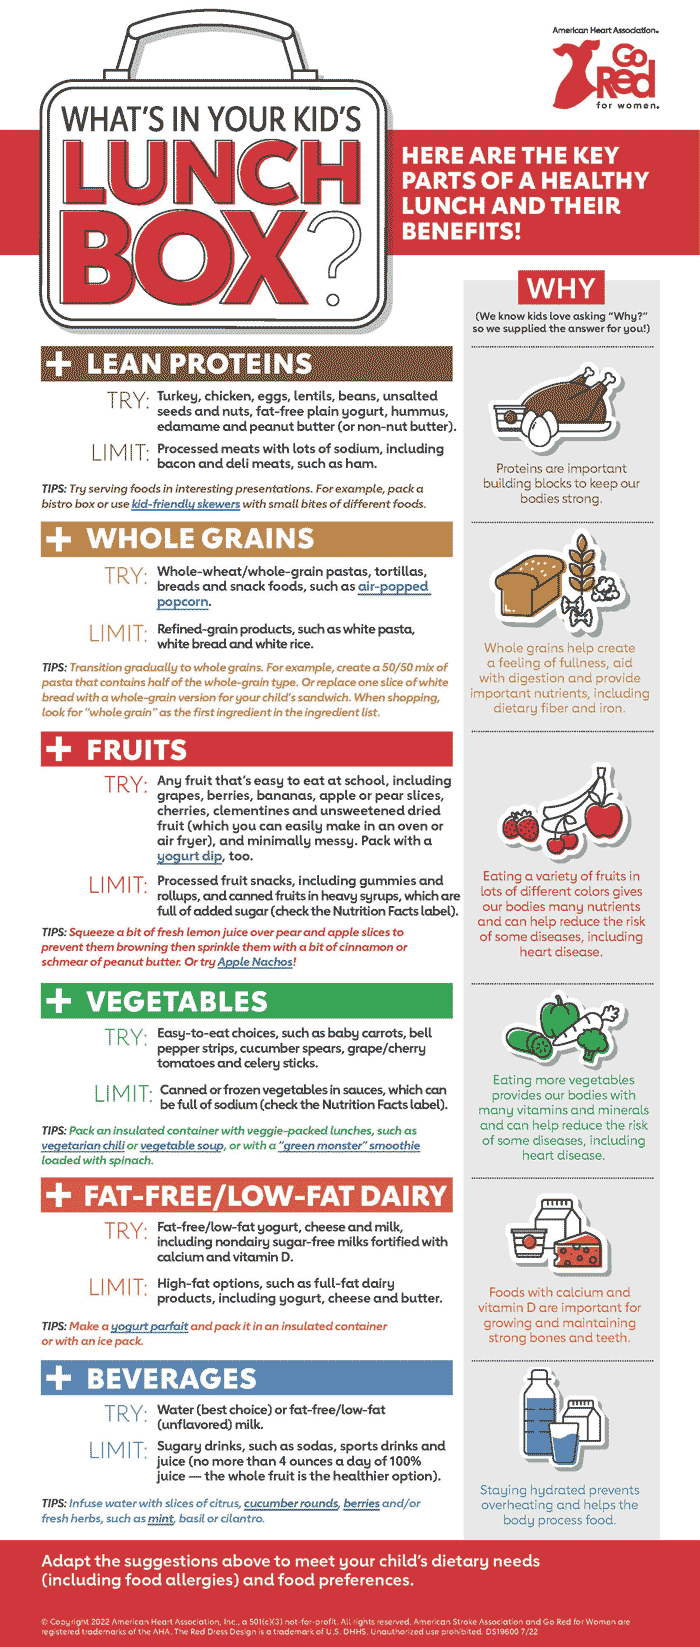 What's in Your Kid's Lunchbox Infographic